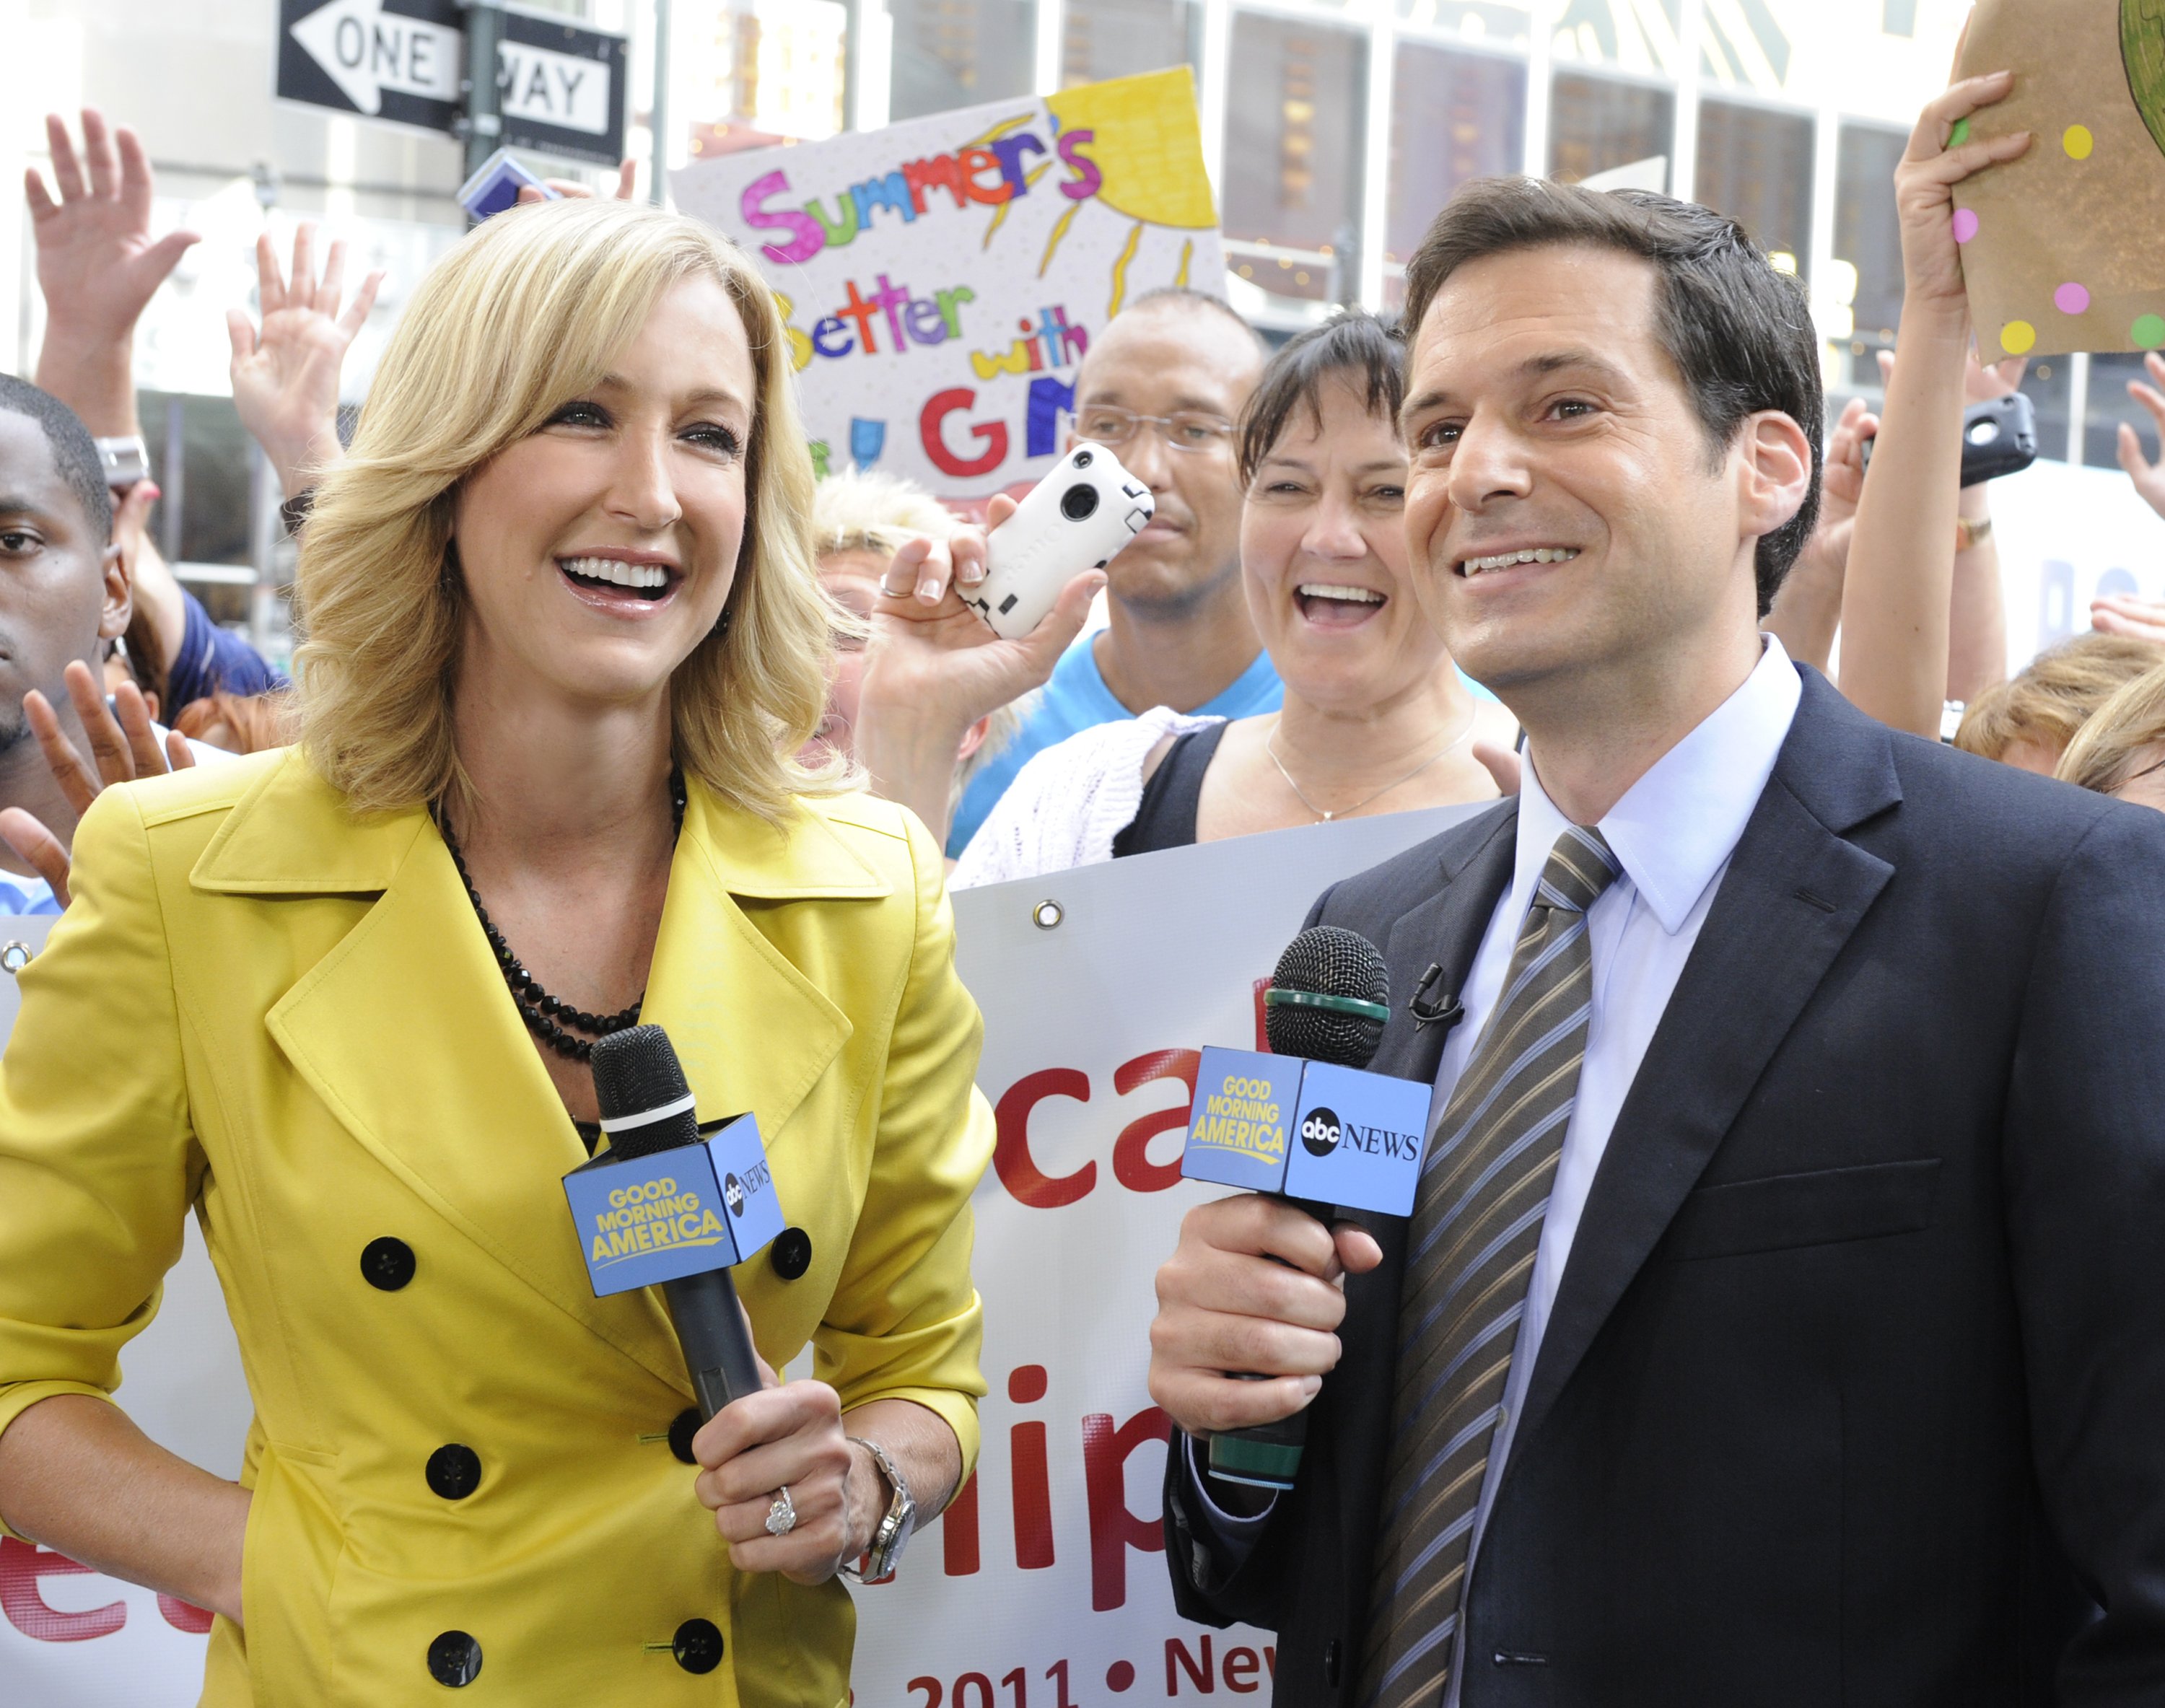 Lara Spencer and John Berman on a "Good Morning America" episode aired on July 13, 2011, on Walt Disney Television. | Source: Getty Images